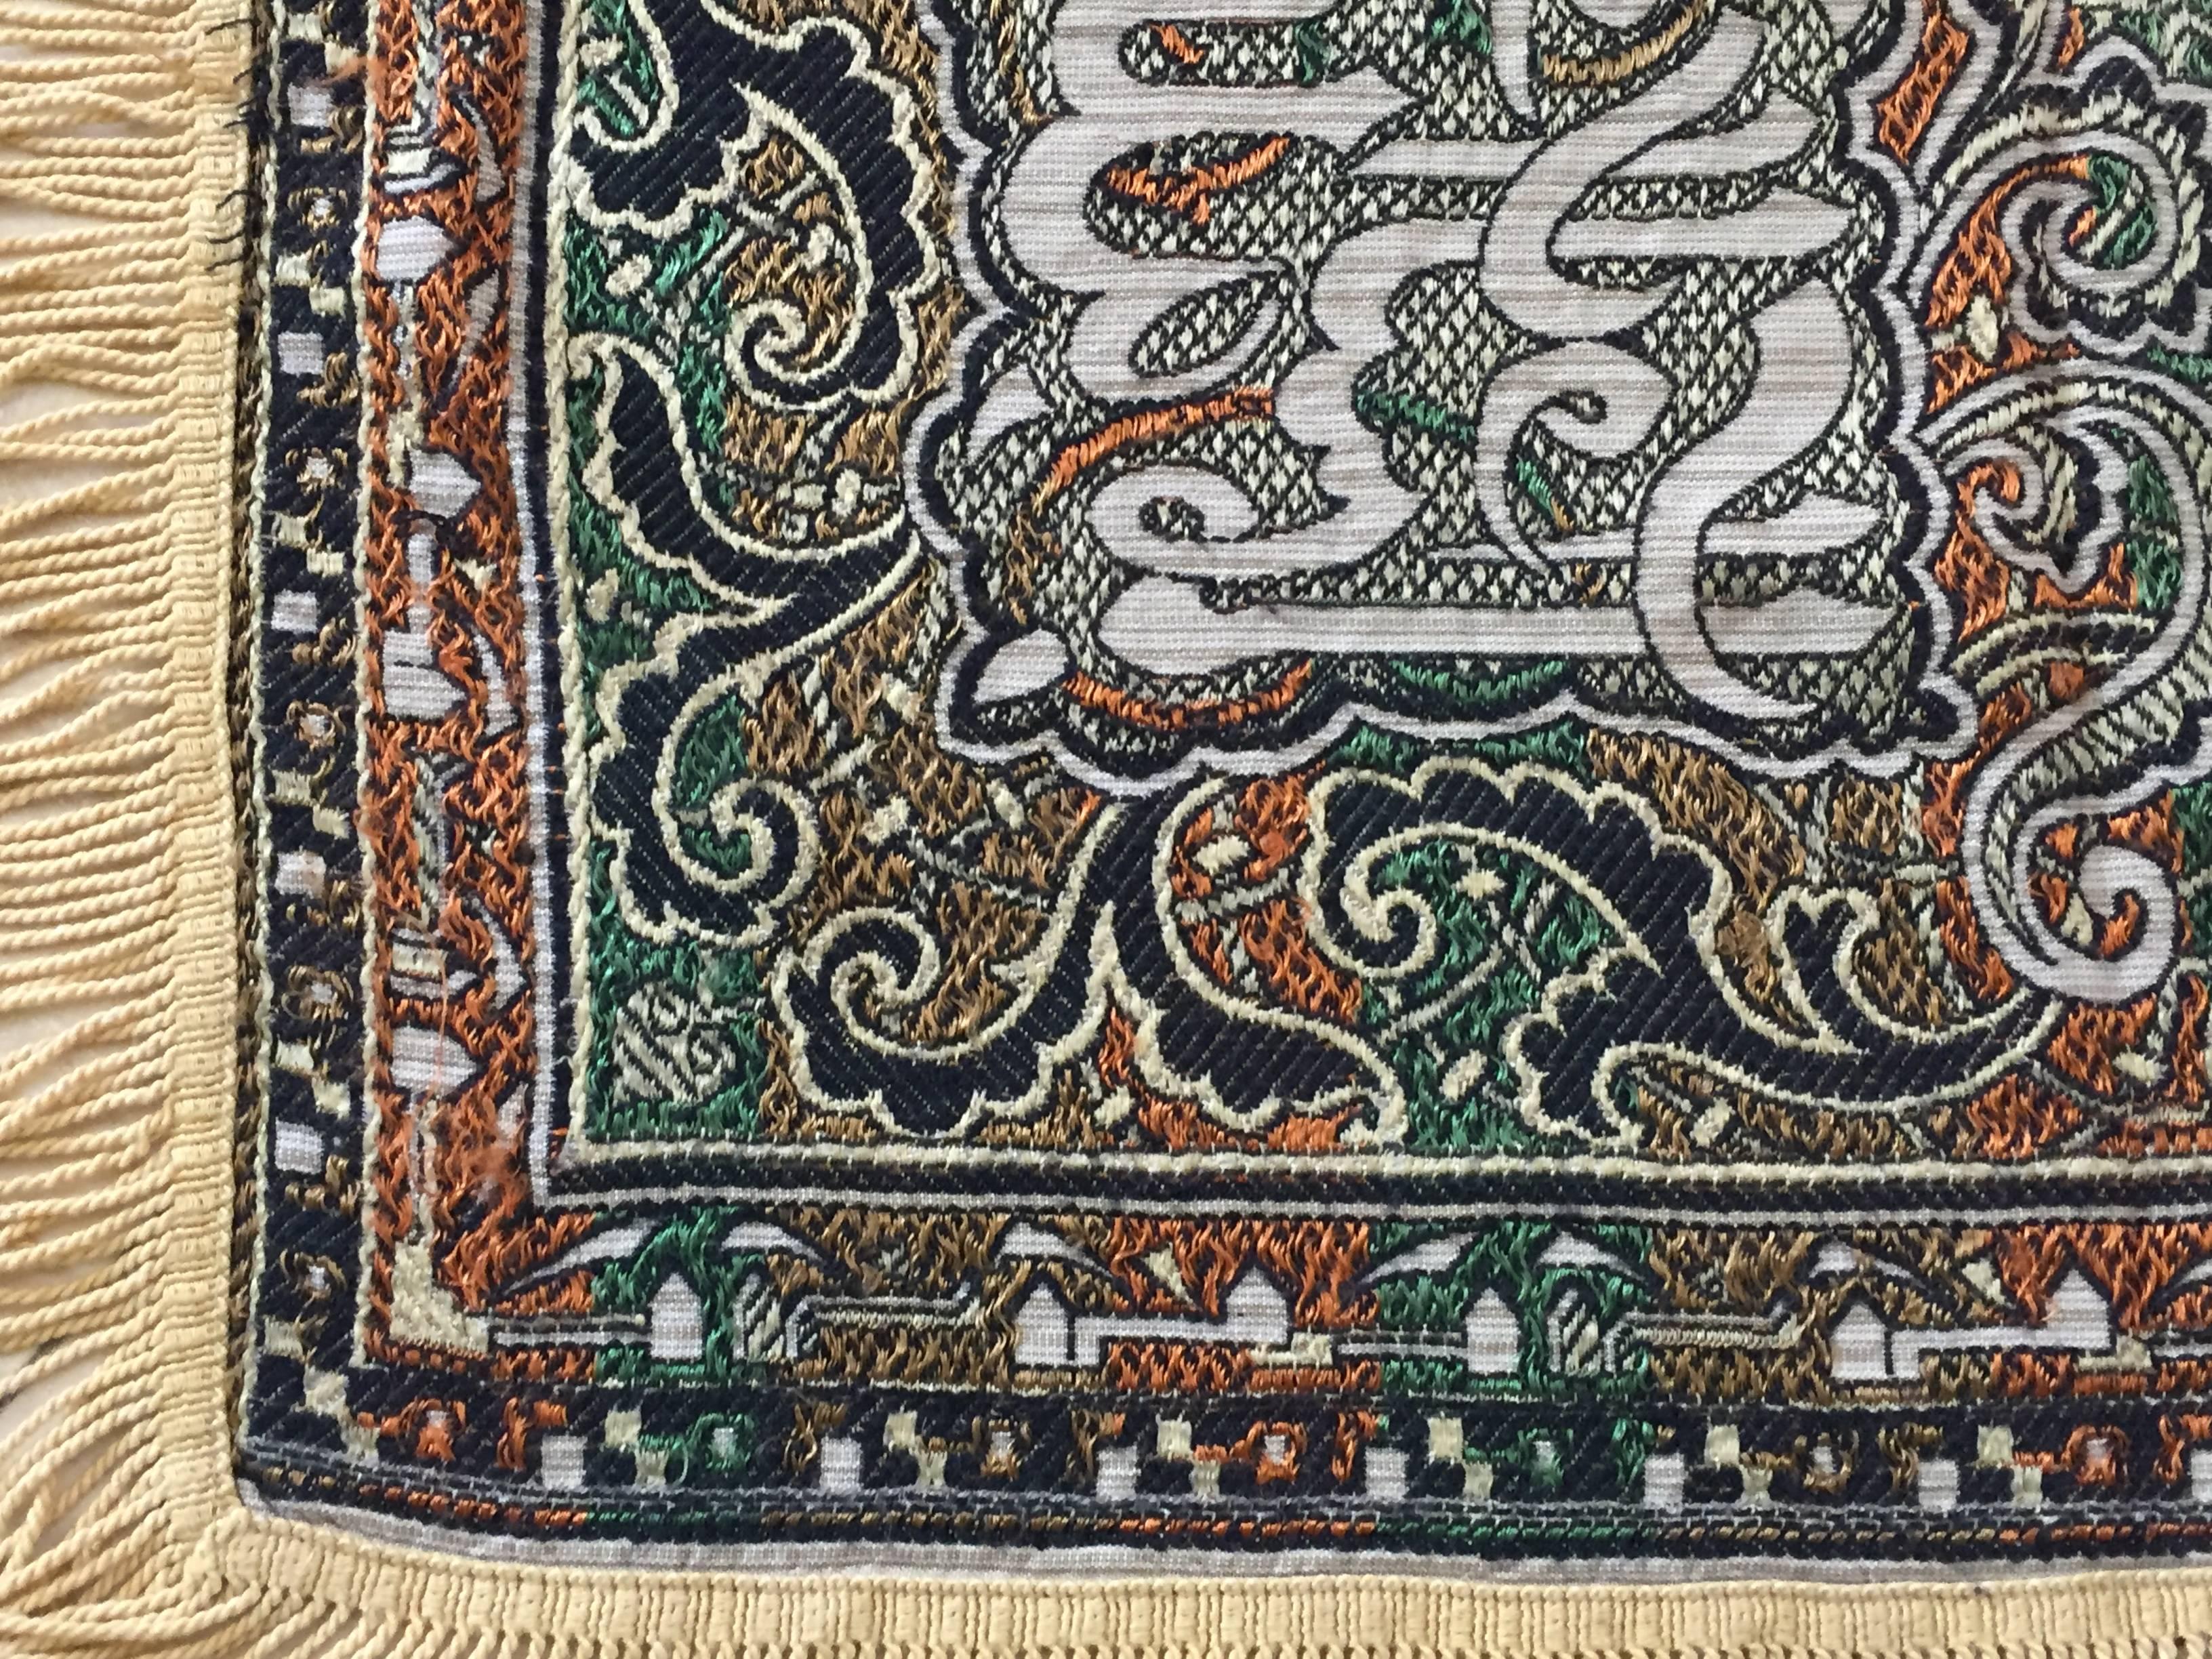 Granada, Islamic Spain, great textile with ivory color fringes featuring Moorish floral designs and calligraphy Arabic writing.
Colors are earth tone in green, ivory and deep Moroccan red.
Could be used as a piano shawl, decorative Spanish Moorish